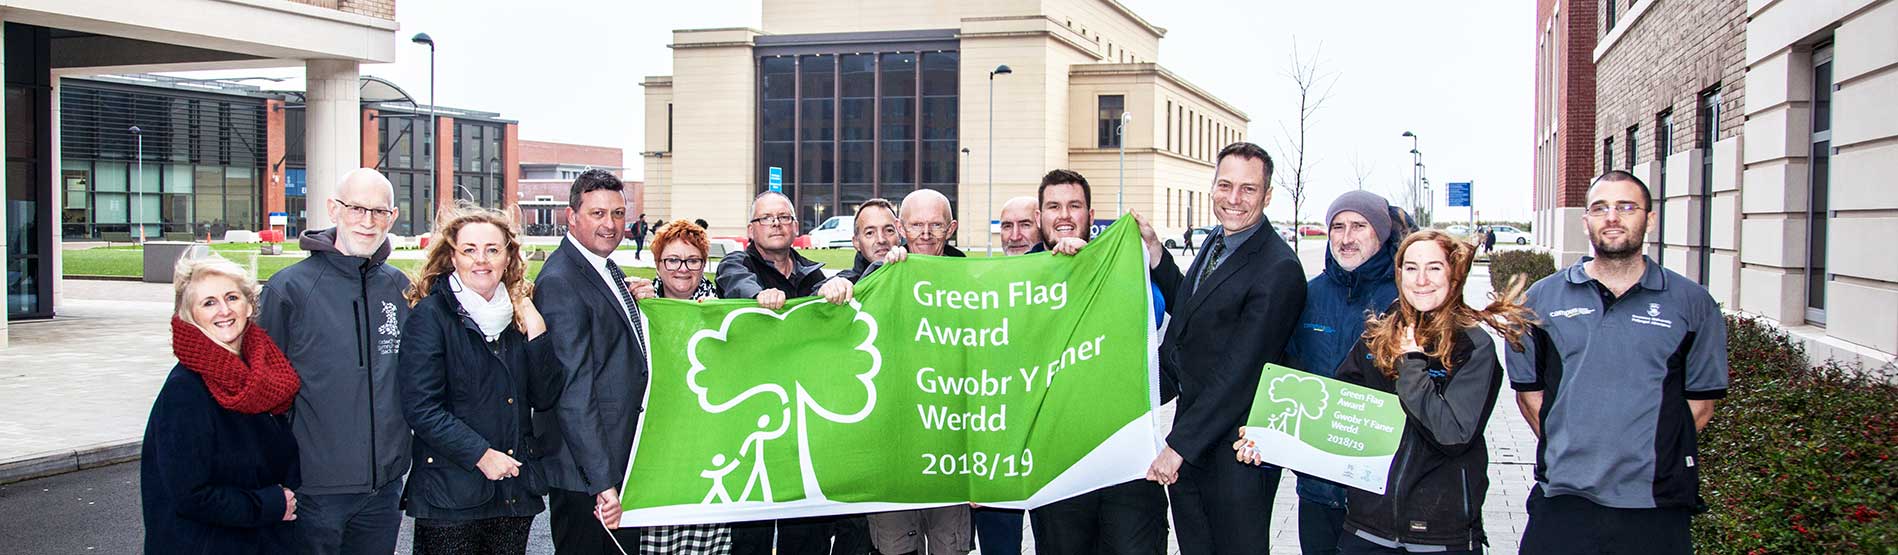 Grounds Team receiving the Green Flag at the Bay Campus